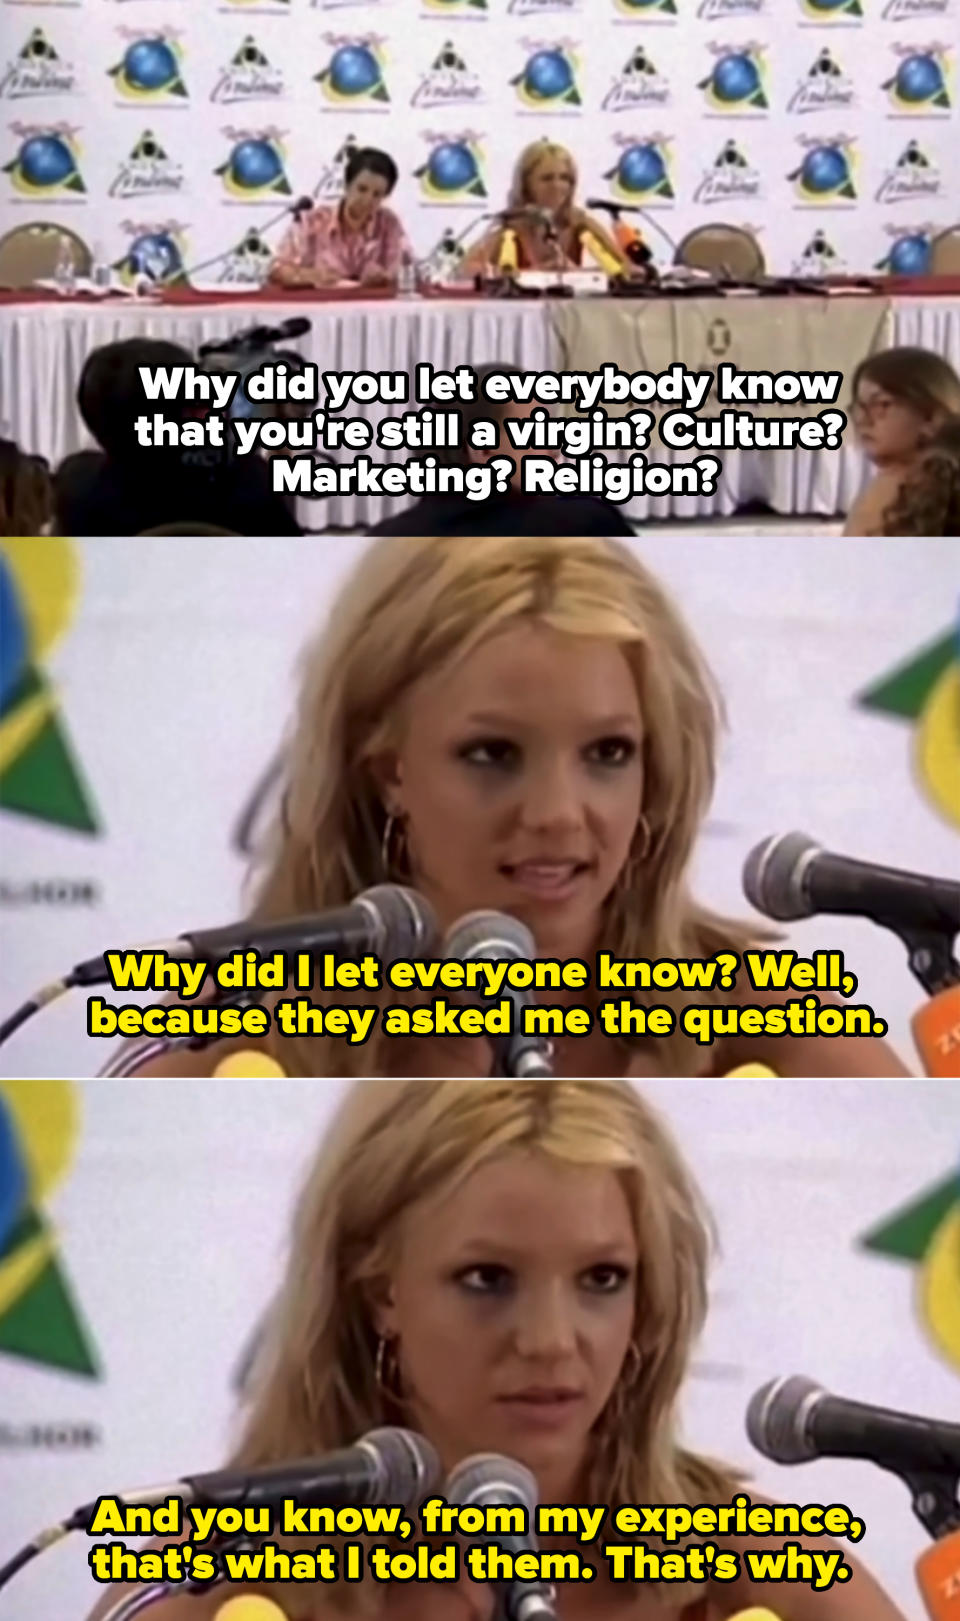 "Why did you let everybody know that you're still a virgin? Culture? Marketing? Religion?" Britney: "Well, because they asked me the question; and you know, from my experience, that's what I told them, that's why"